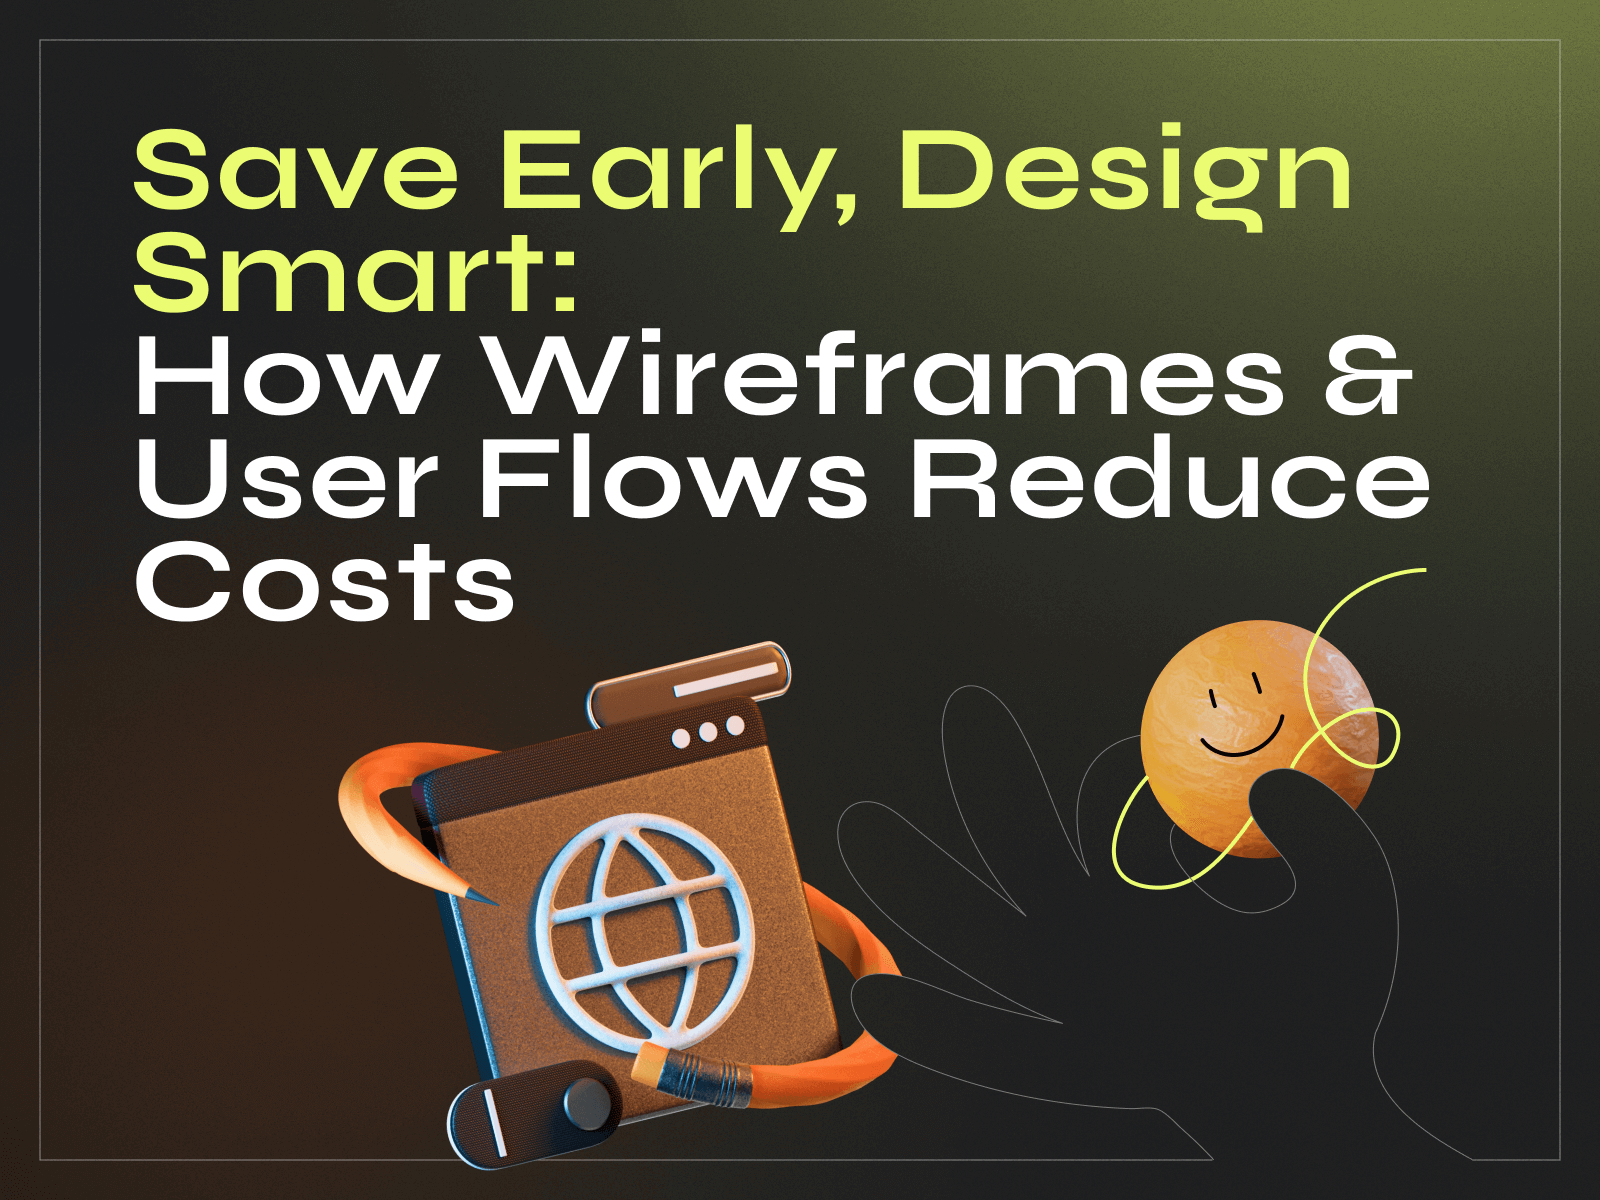 Save Early, Design Smart: How Wireframes & User Flows Reduce Costs - Photo 